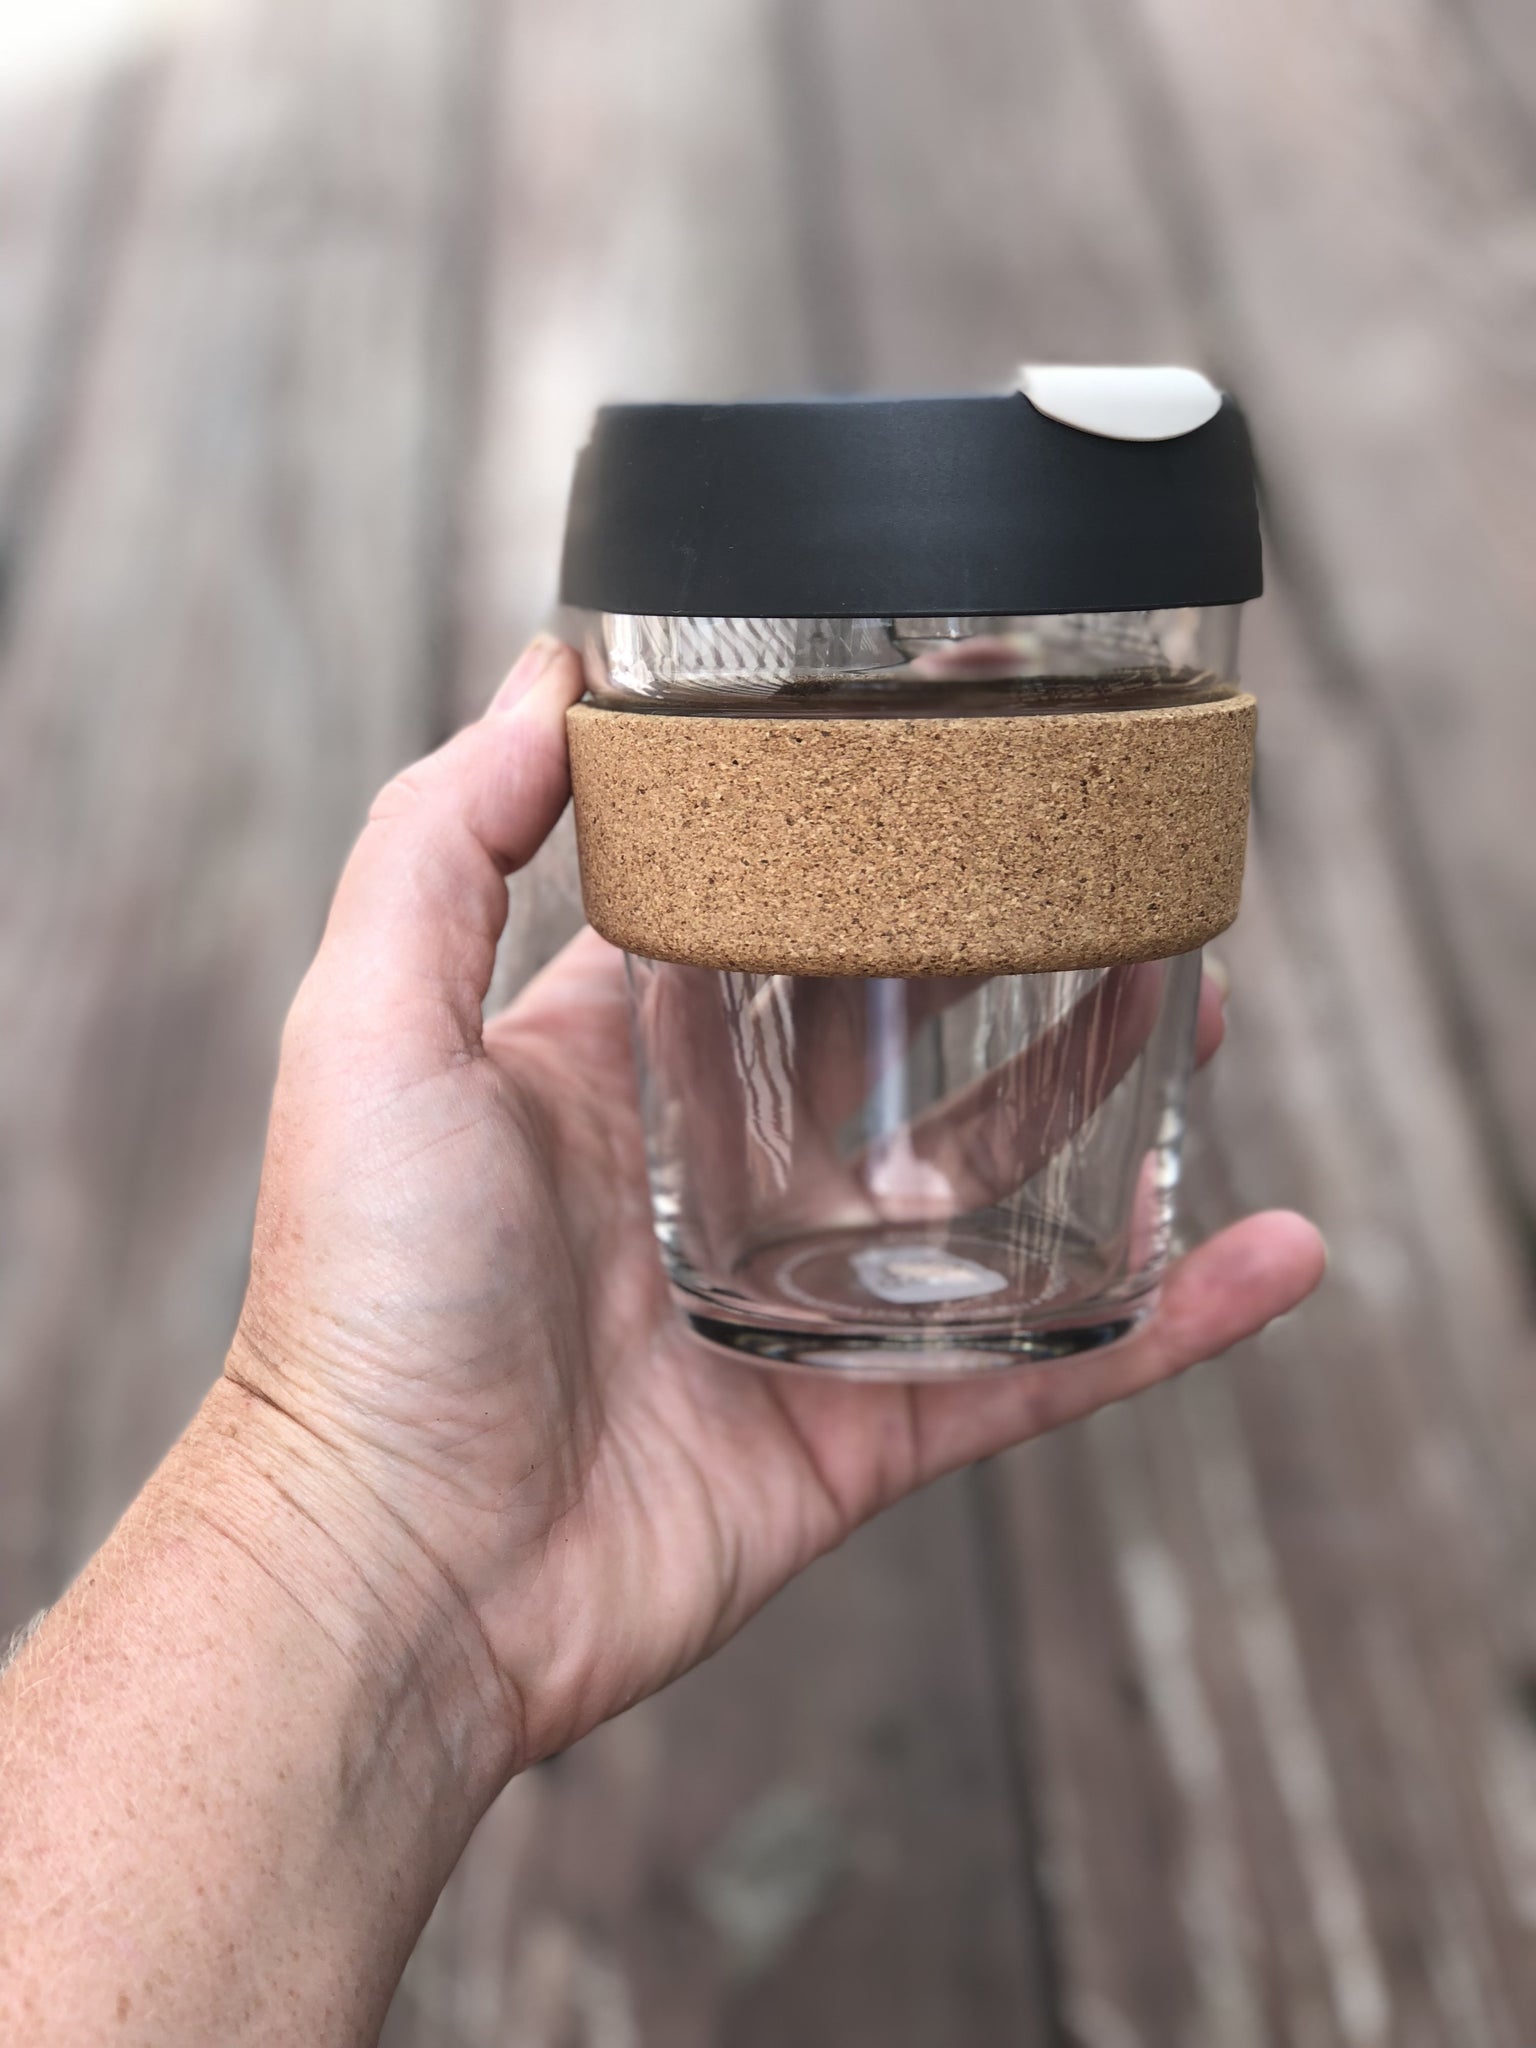 KeepCup review: Is the reusable cork coffee cup worth buying